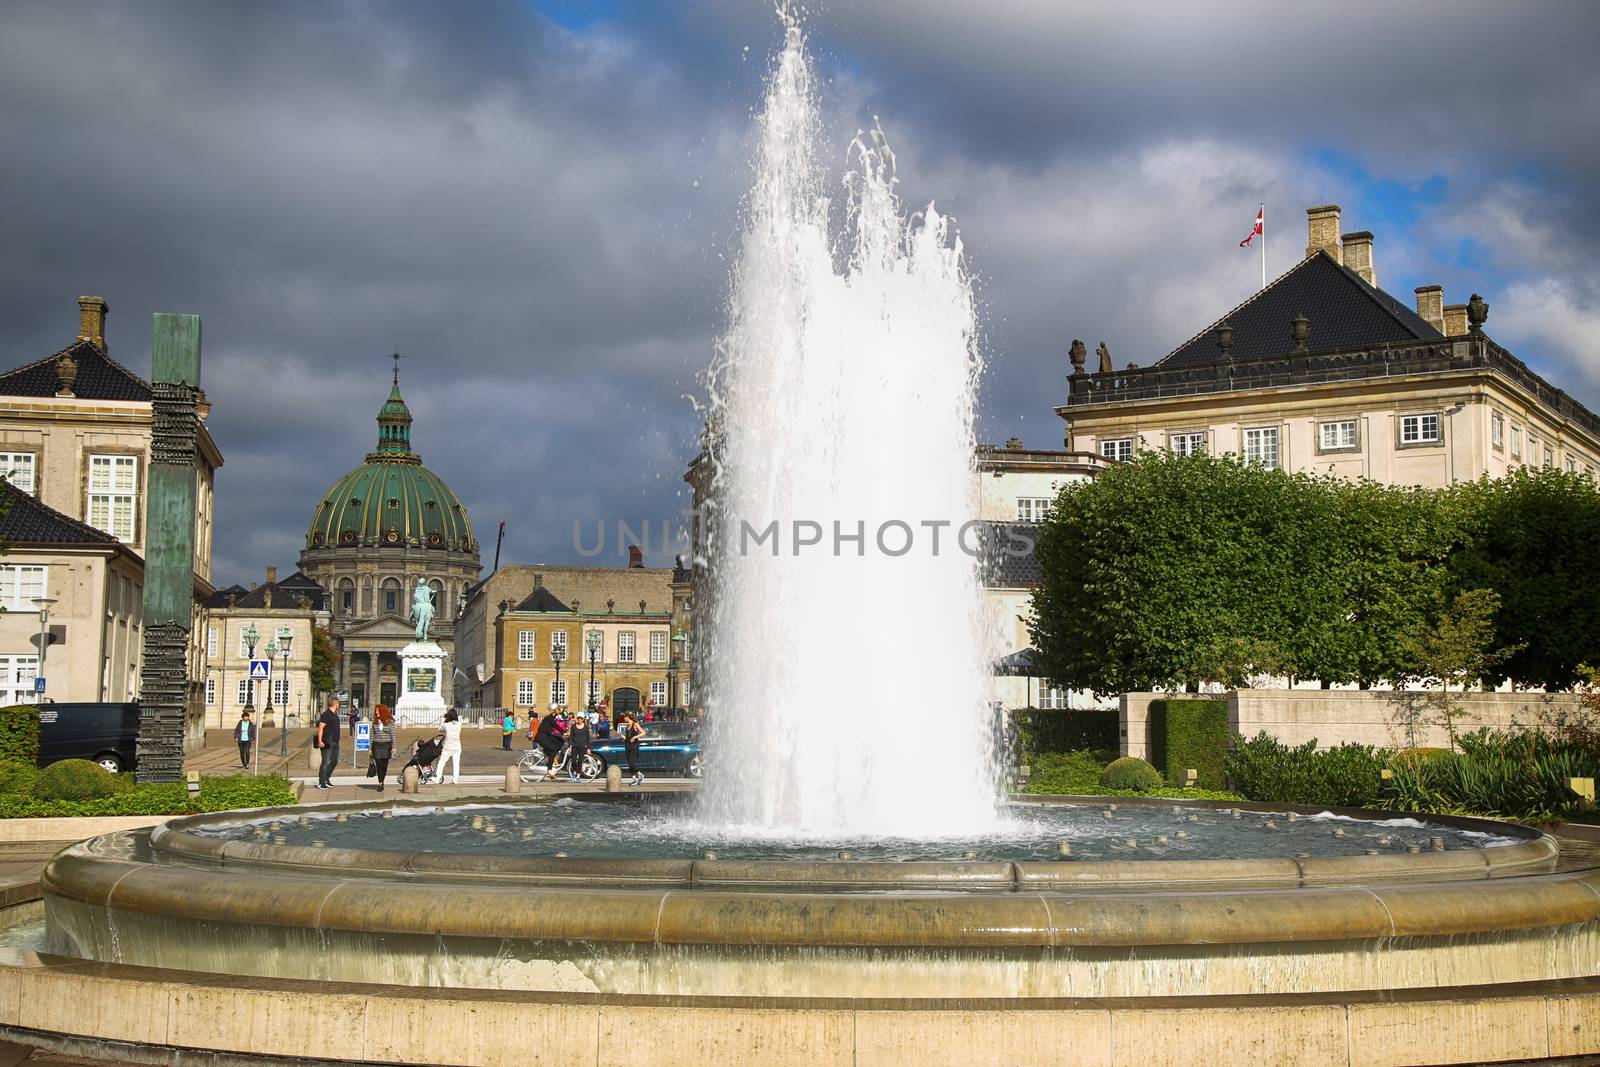 COPENHAGEN, DENMARK - AUGUST 15, 2016: A fountain in the Amalie Garden, with many tourist, in the background is Frederik's Church and Sculpture of Frederik V in Copenhagen, Denmark on August 15, 2016.